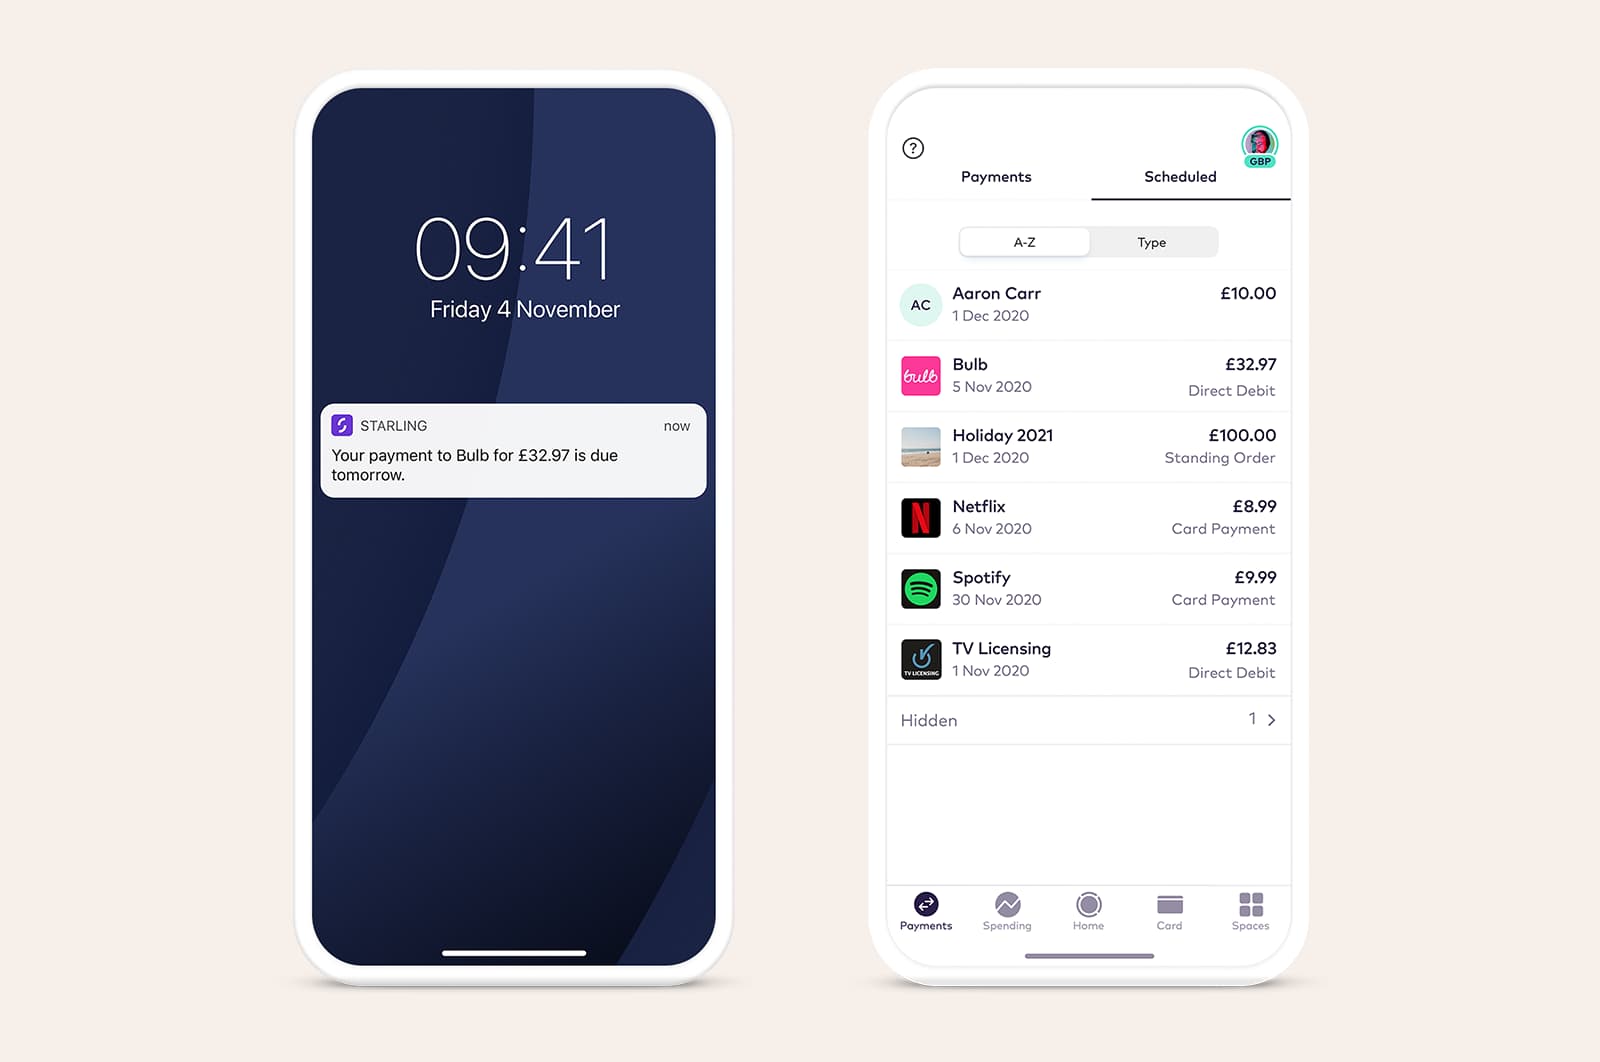 Starling app scheduled payment screen